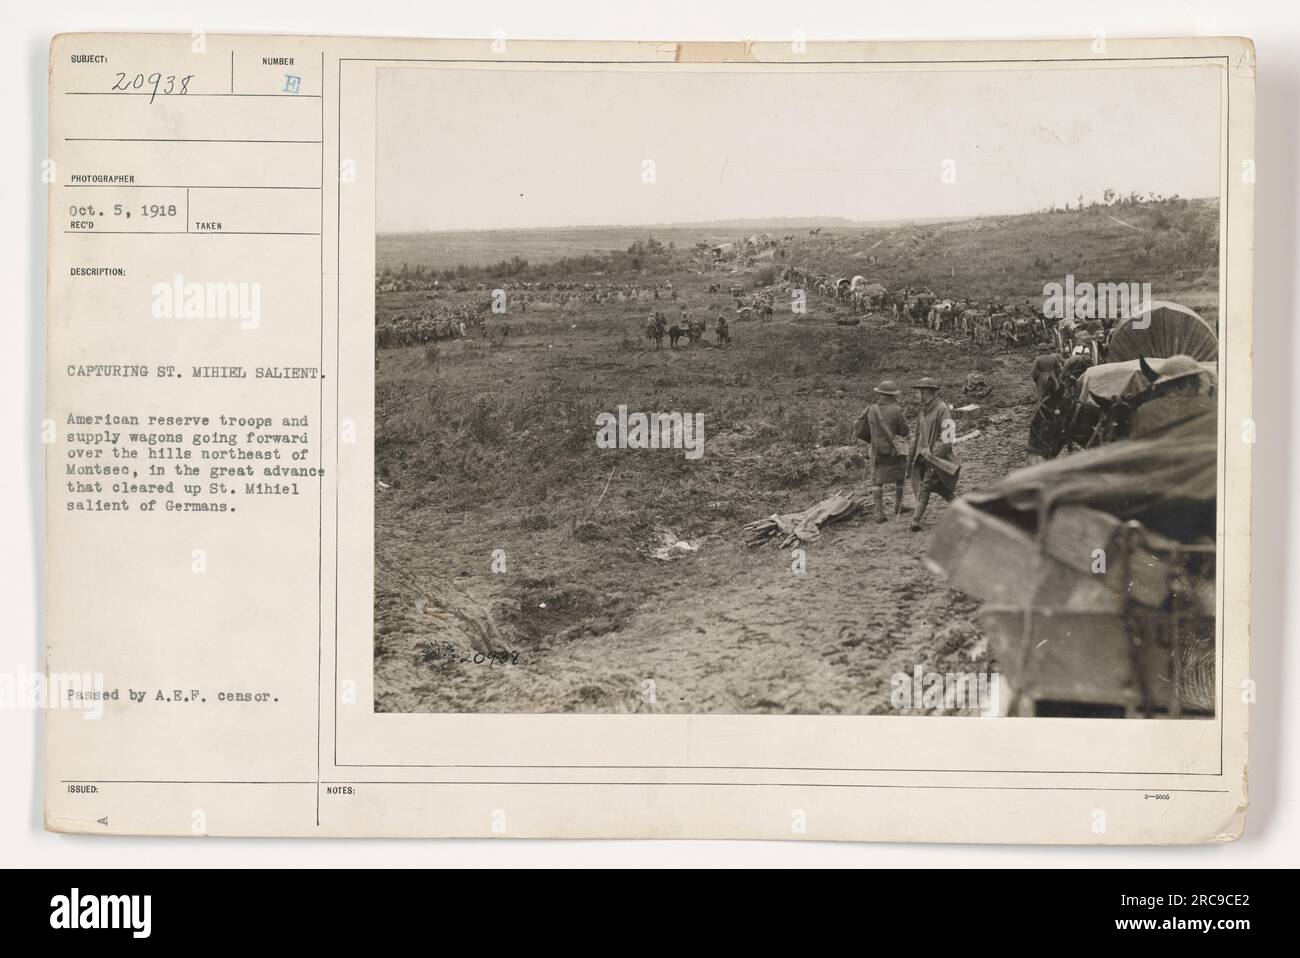 American reserve troops and supply wagons advancing over hills northeast of Montsee during the operation to clear up the St. Mihiel salient of Germans, October 5, 1918. Image approved by the A.E.P. censor in 2008. Stock Photo